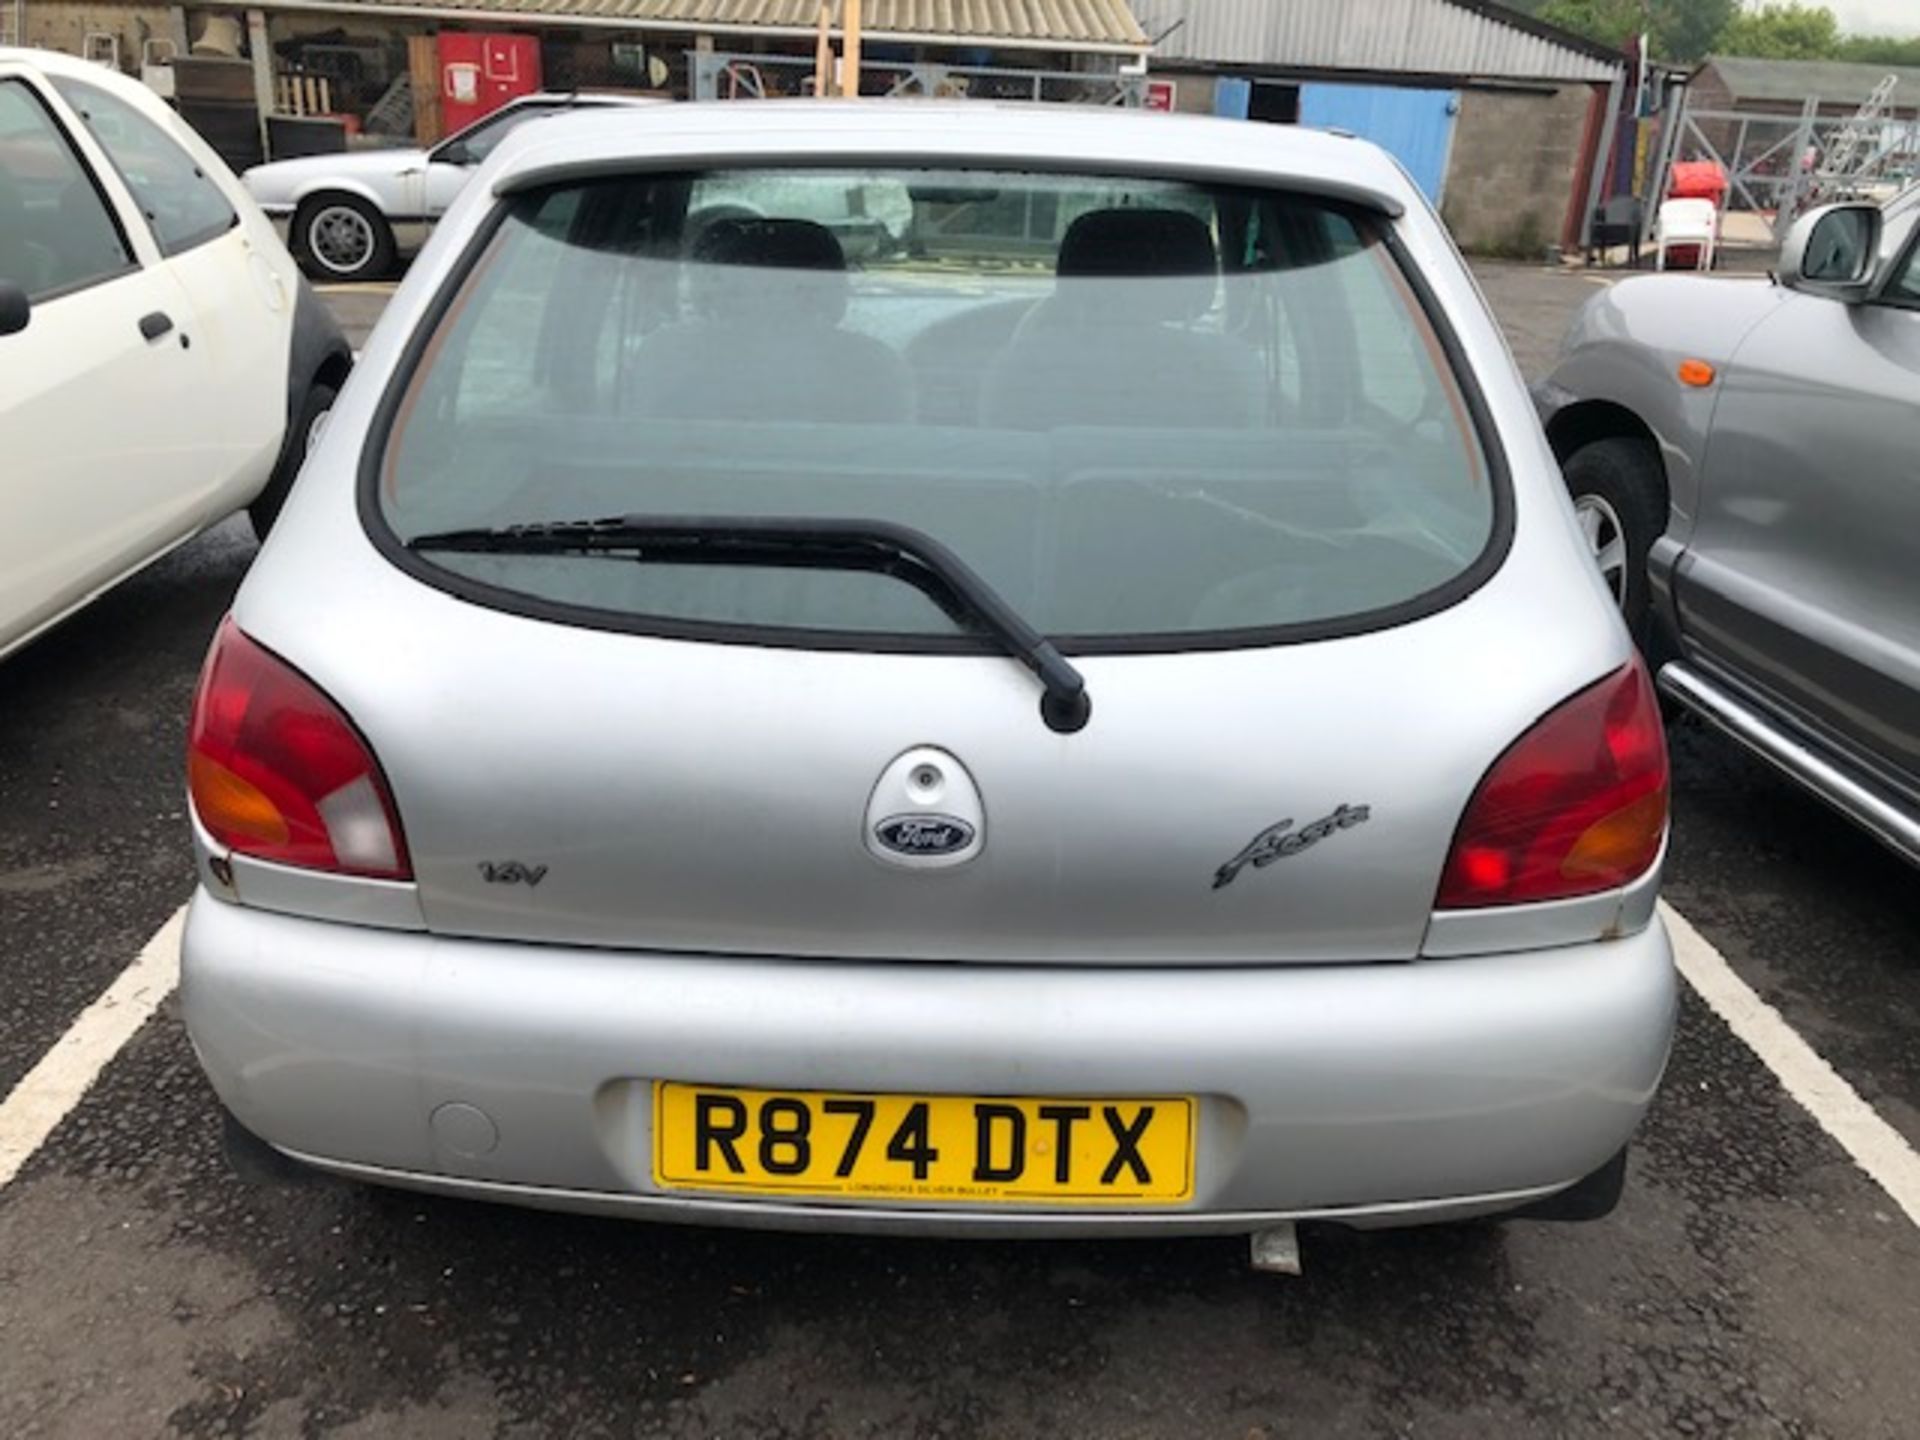 Ford Fiesta 4 door Ghia Reg No R874 DTX. We have the V5 and keys, non-runner possibly due to fuel - Image 4 of 5